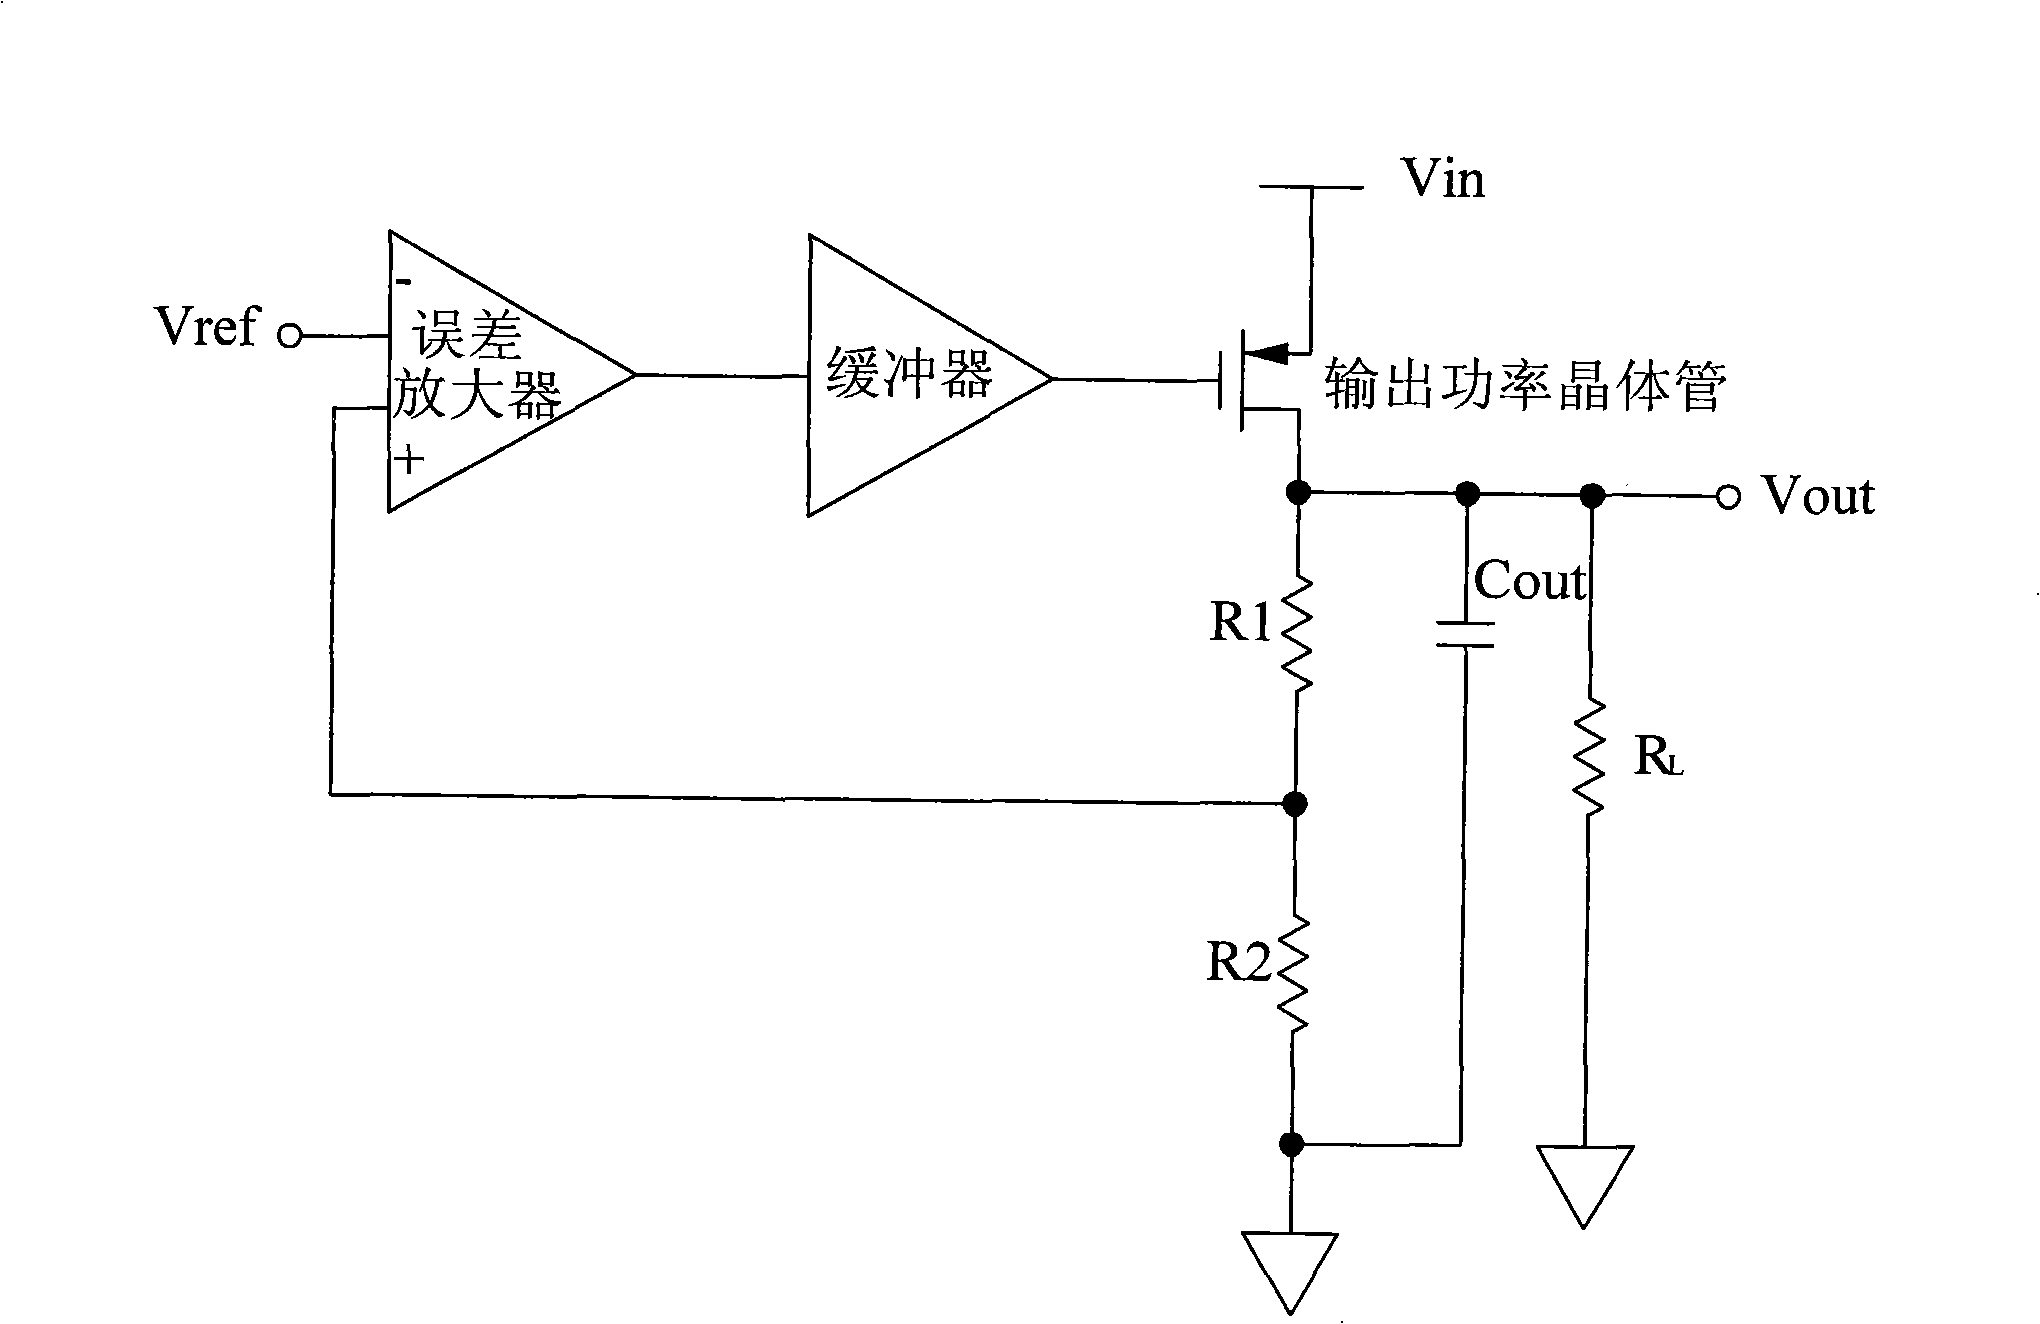 Low pressure drop voltage stabilizer for enhancing linearity and load regulation rate characteristic